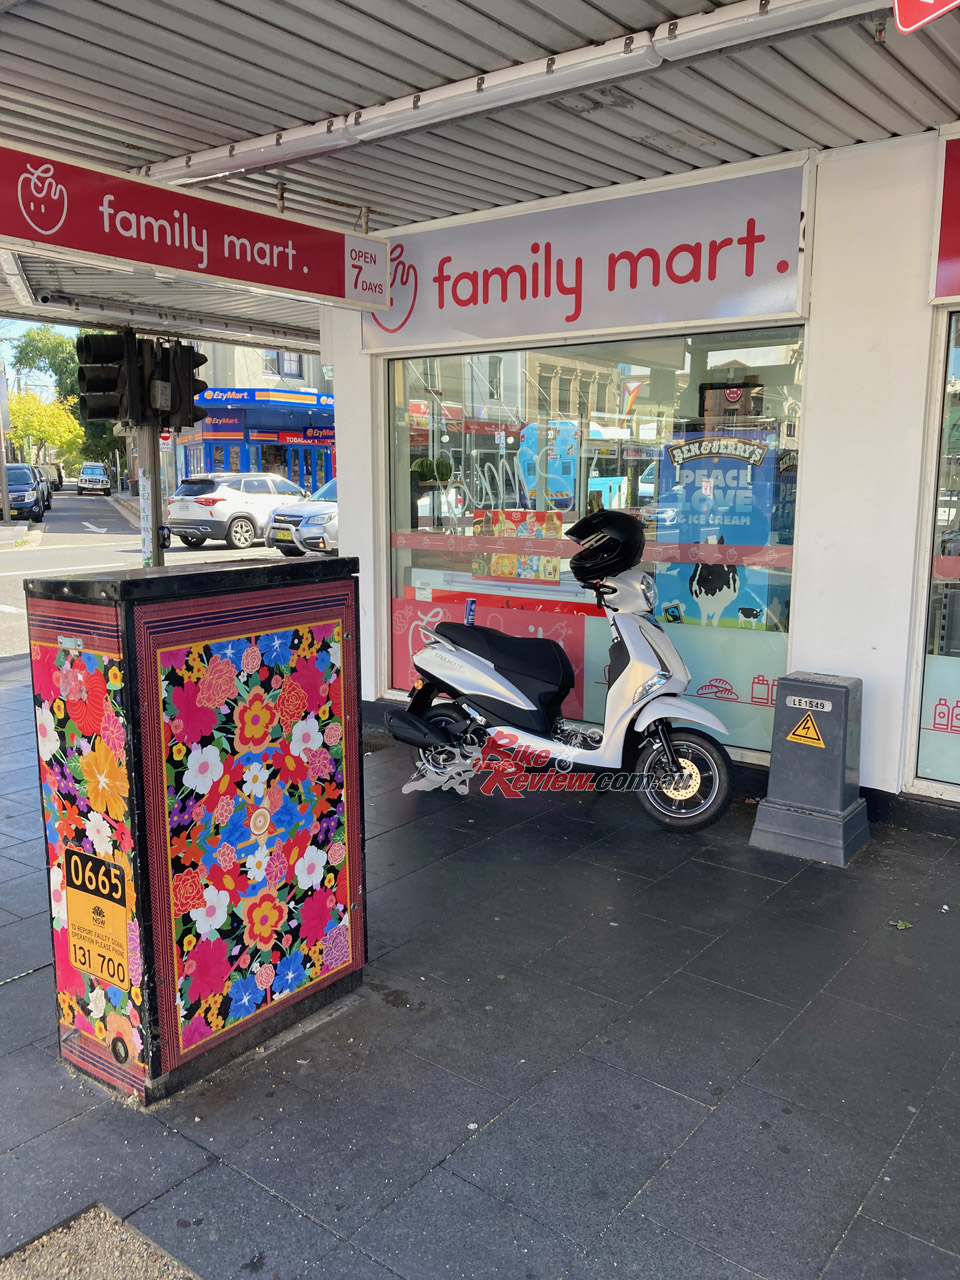 I rode the D'elight 125 on a 200km round trip from the Central Coast to Marrickville and back, via the Old Road, with no issues. It was fun, actually!